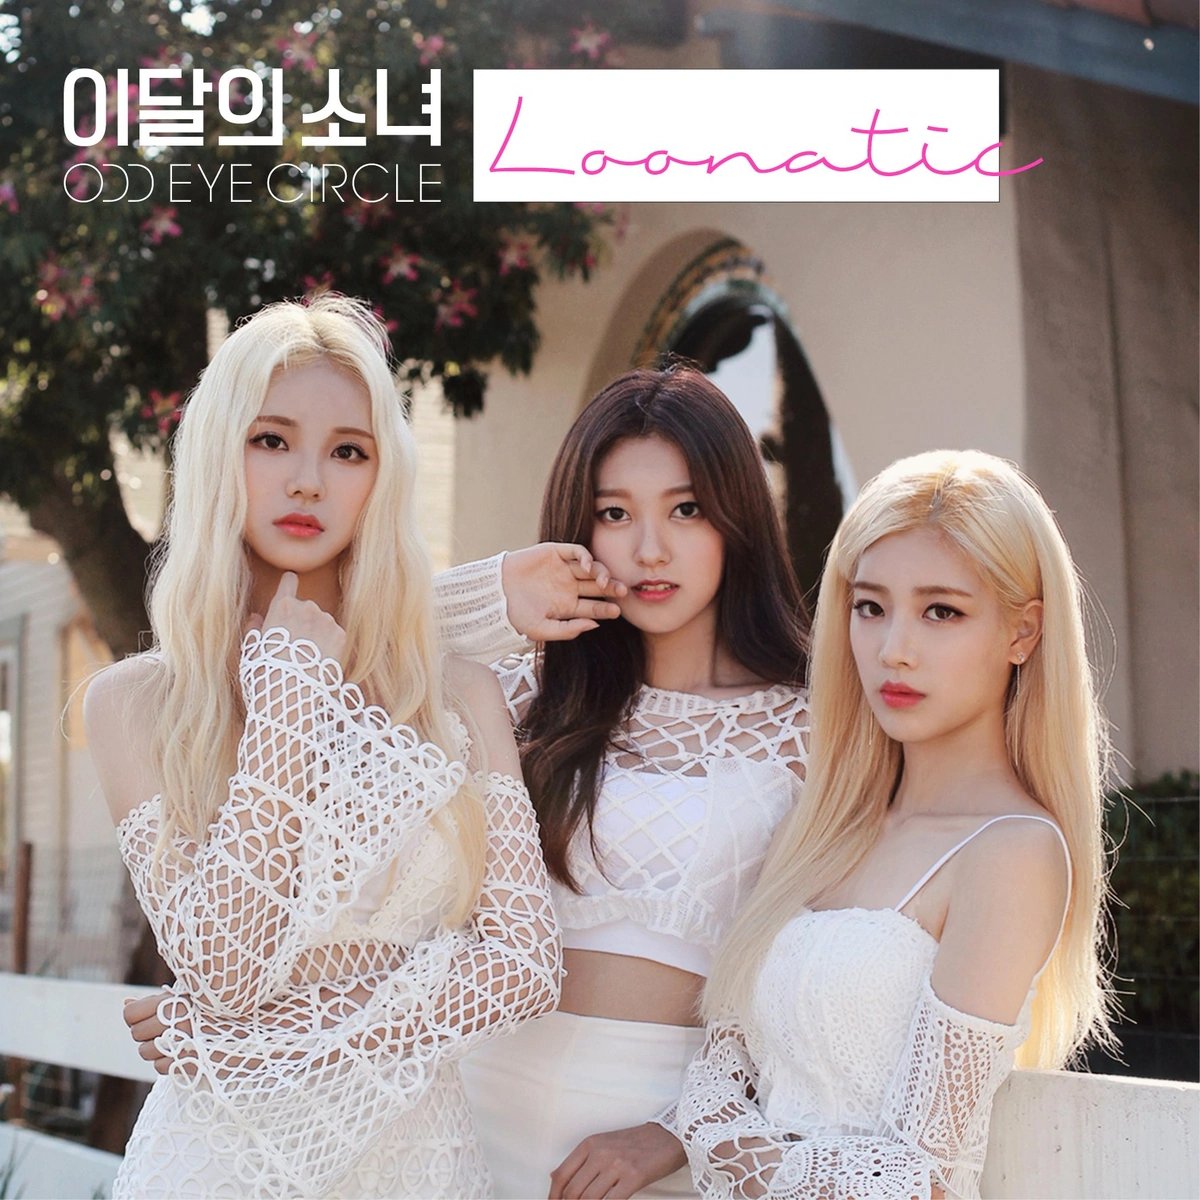 13. loonatic (eng. and kor. versions) by loona oec;both versions are just perfection